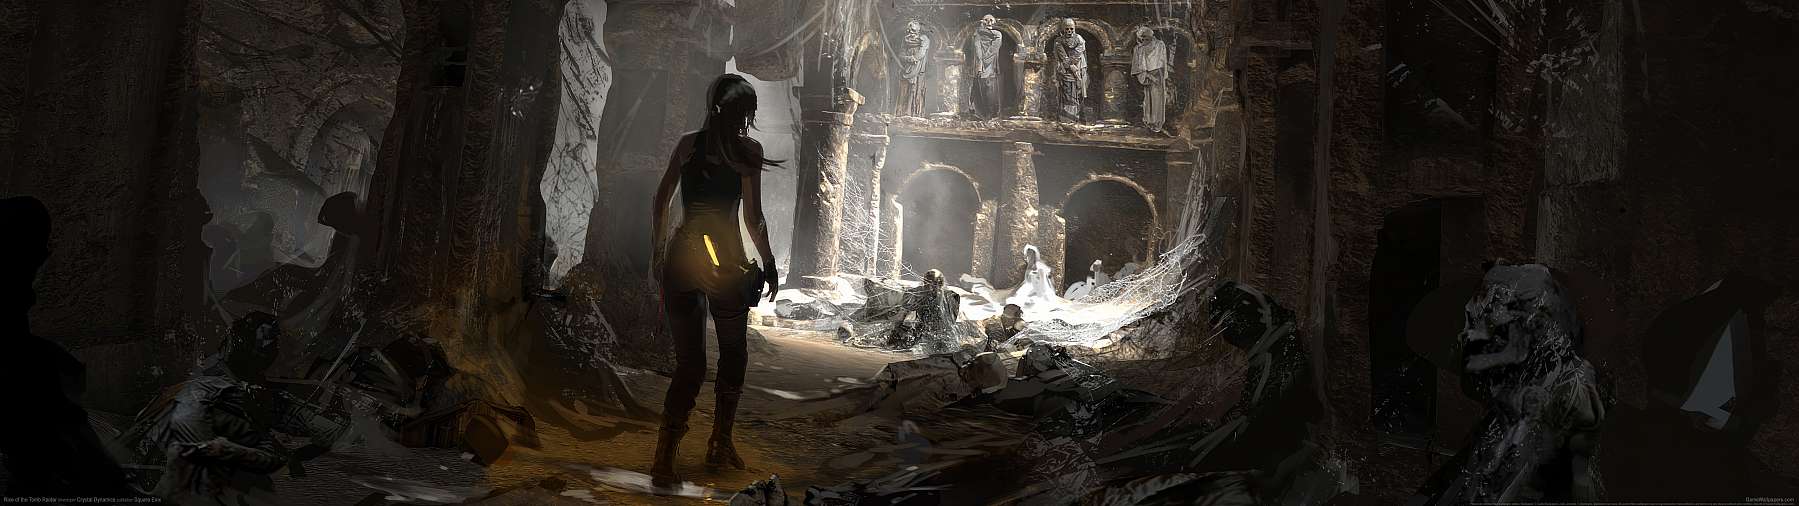 Rise of the Tomb Raider superwide wallpaper or background 24